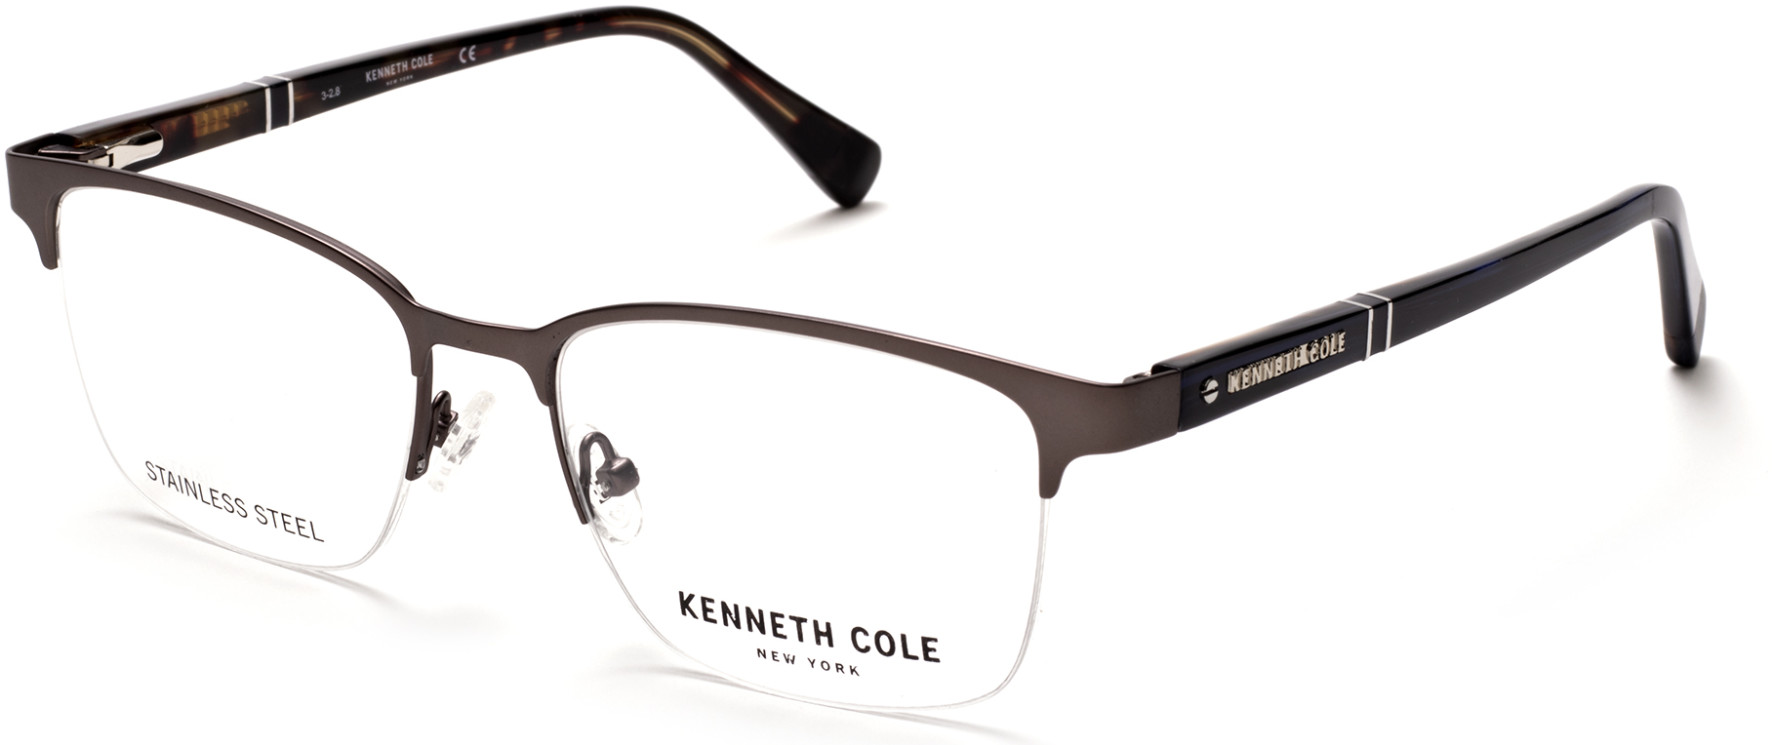 KENNETH COLE NY 0291 009